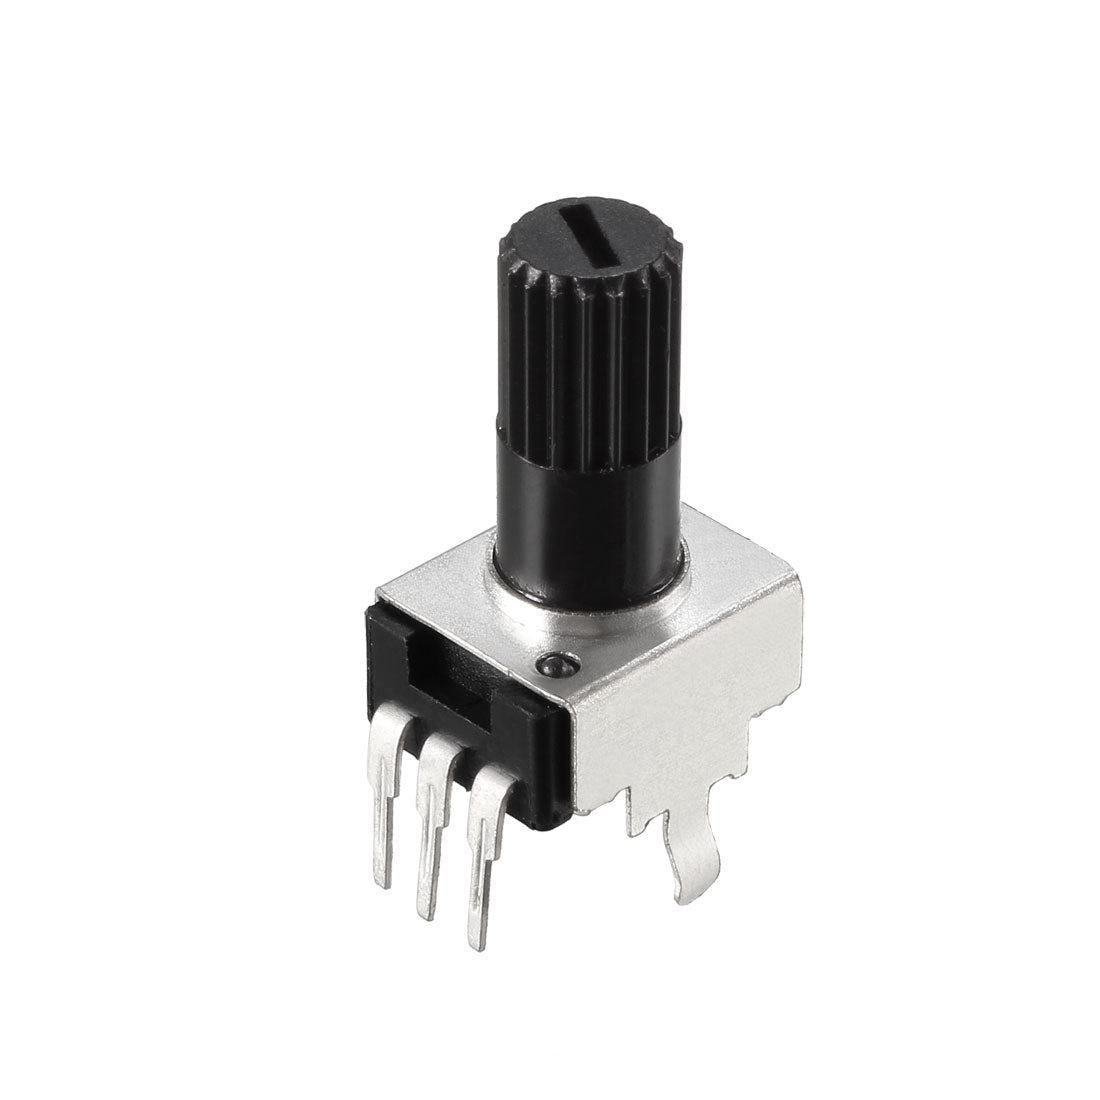 uxcell Uxcell Potentiometer 10K Ohm Variable Resistors Single Turn Rotary Carbon Film 5pcs